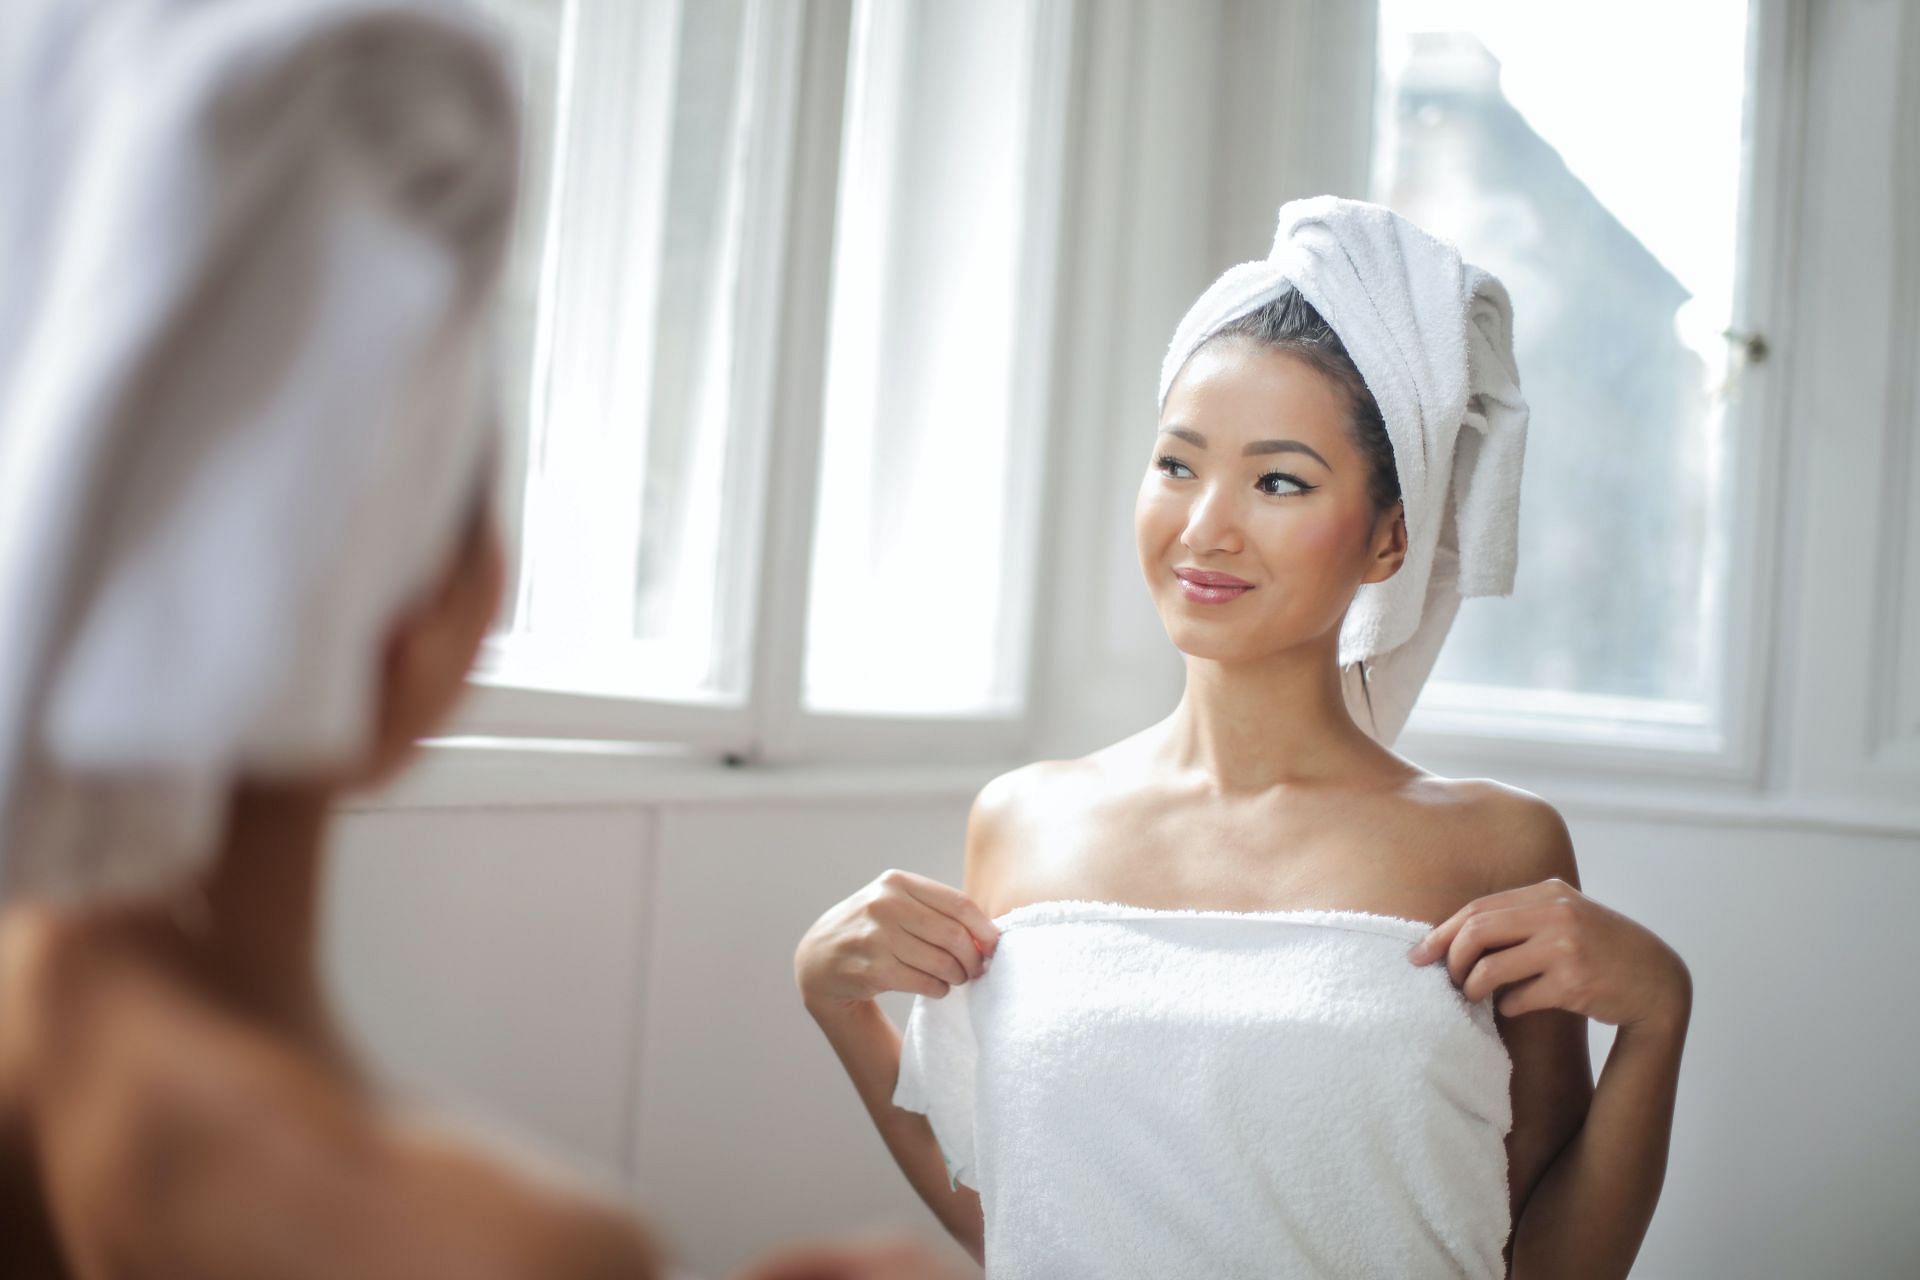 Itchy skin after shower (Image via Pexels/Andrea Piacquadio)